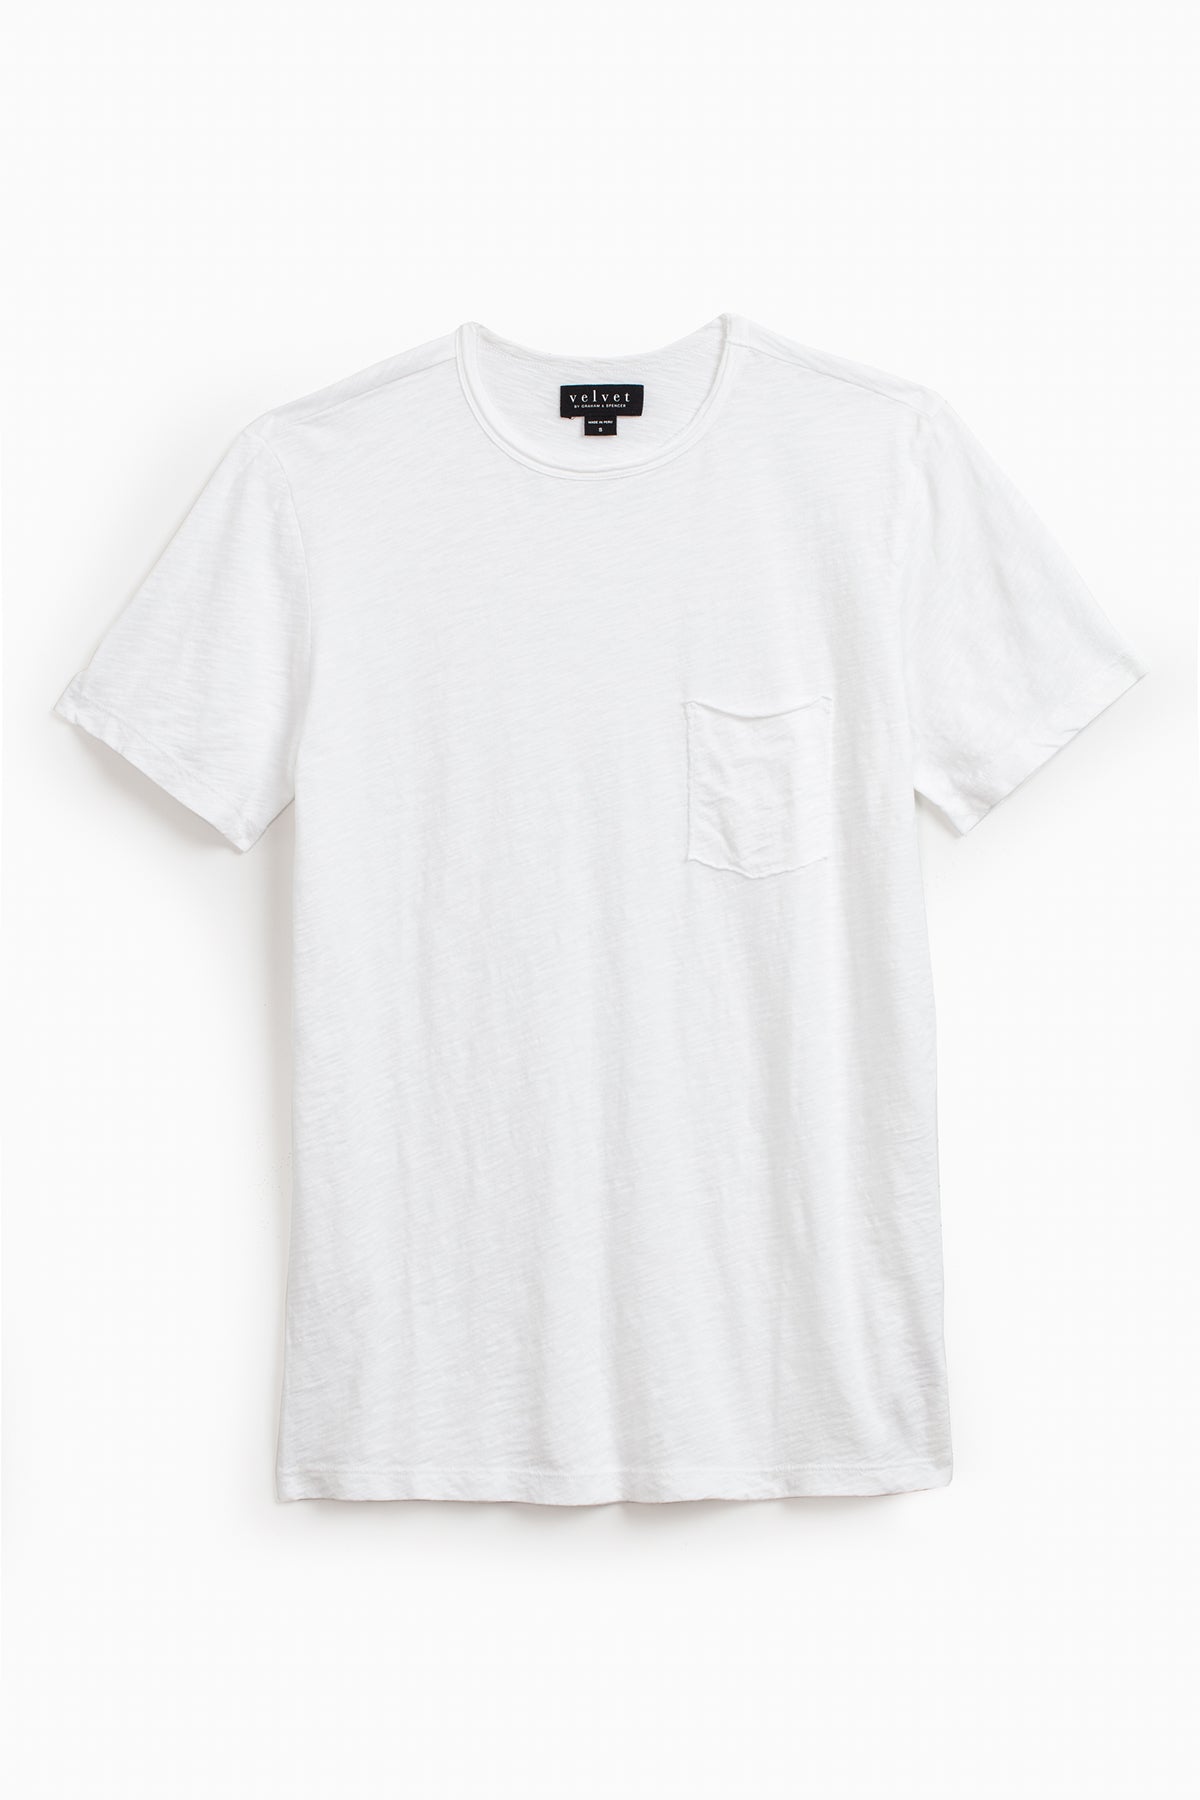   A Velvet by Graham & Spencer CHAD TEE with a chest pocket, crafted from textured cotton slub, displayed on a white background. 